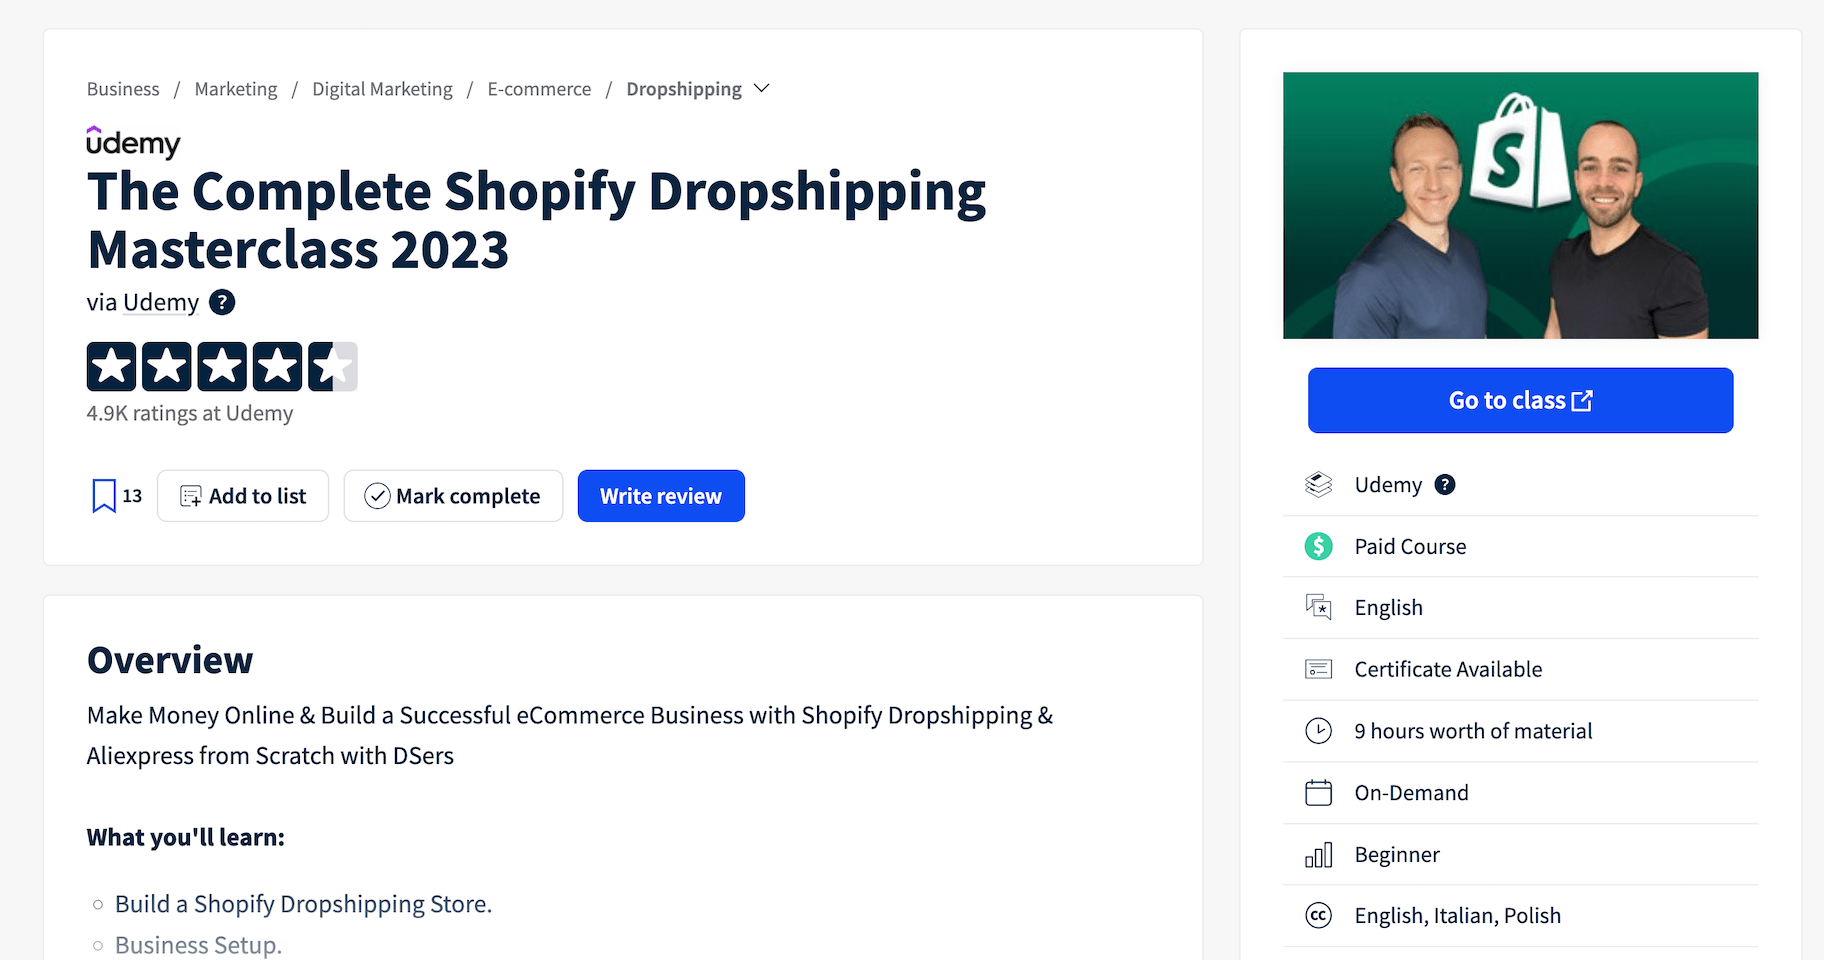 The Complete Shopify Dropshipping Masterclass 2023